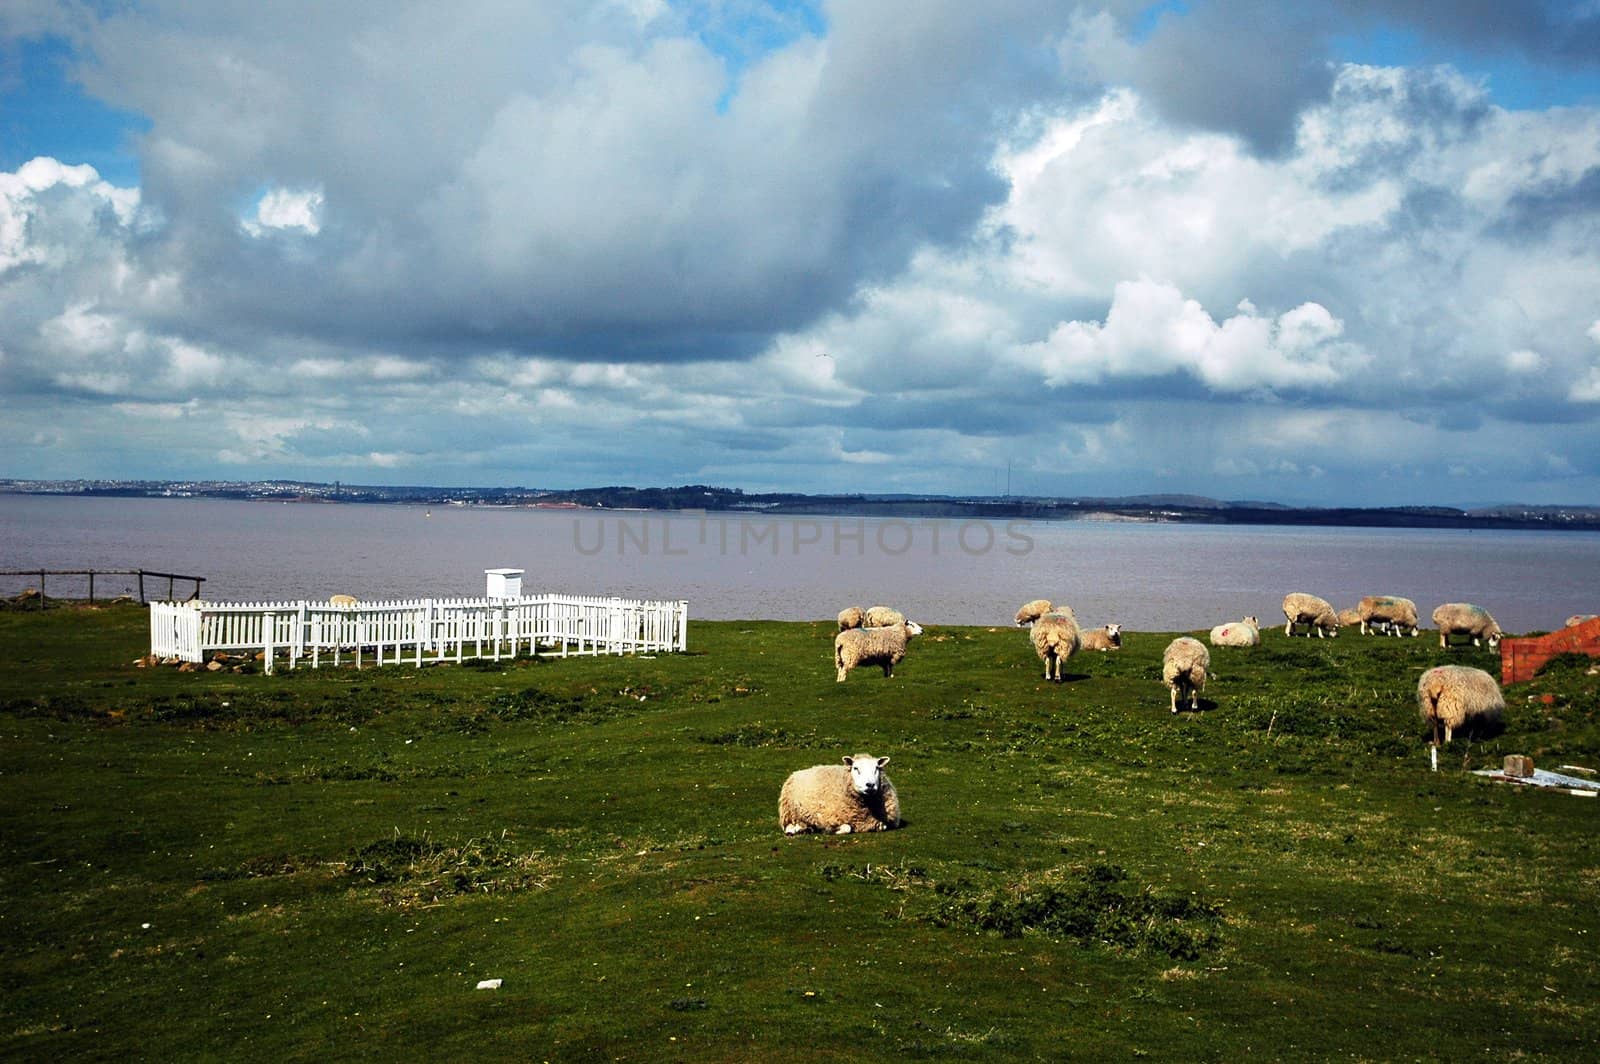 sheep famr on Flat holm island with a flock of sheep,  grass field and beautiful blue sky with wild white clouds